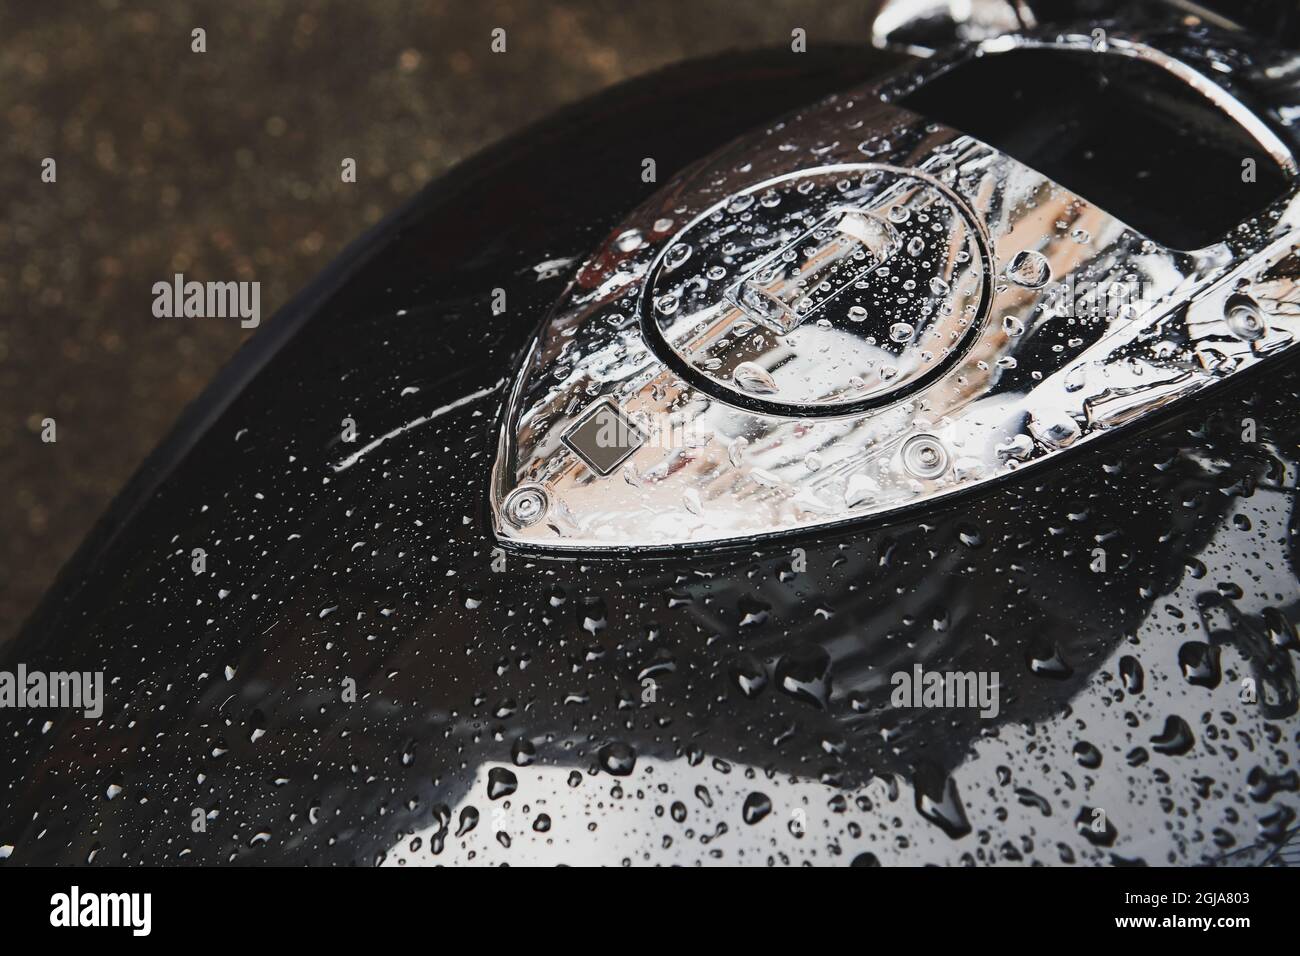 Bike covered with water drops after rain. Black gasoline tank with metal fuel cap. Outdoor vehicle storage. Closeup. Stock Photo